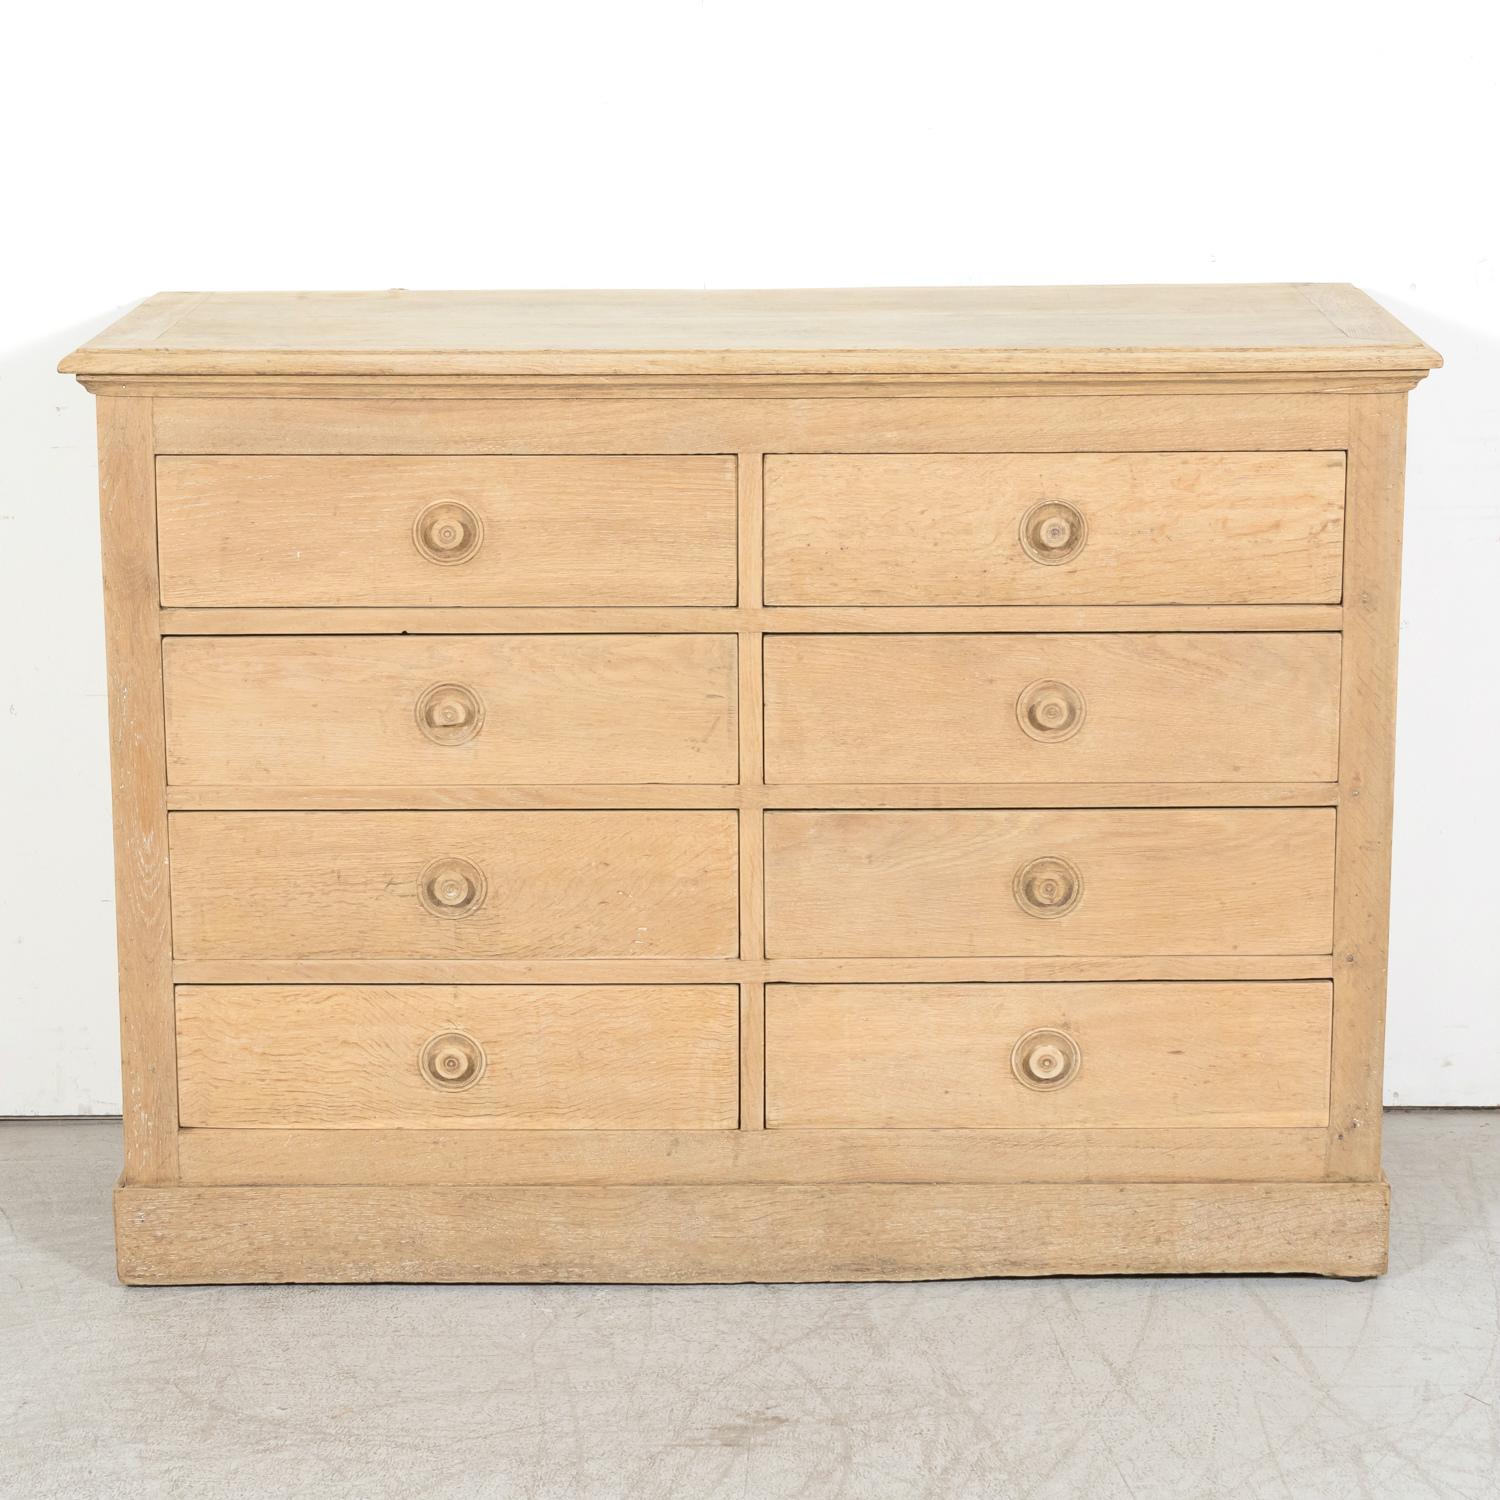 A vintage French meuble de metiers or workshop chest of drawers handcrafted of solid oak in Normandy, circa 1940s. Having a bleached finish, this handsome chest features a bank of eight drawers with their original round wood knobs. The chest has a